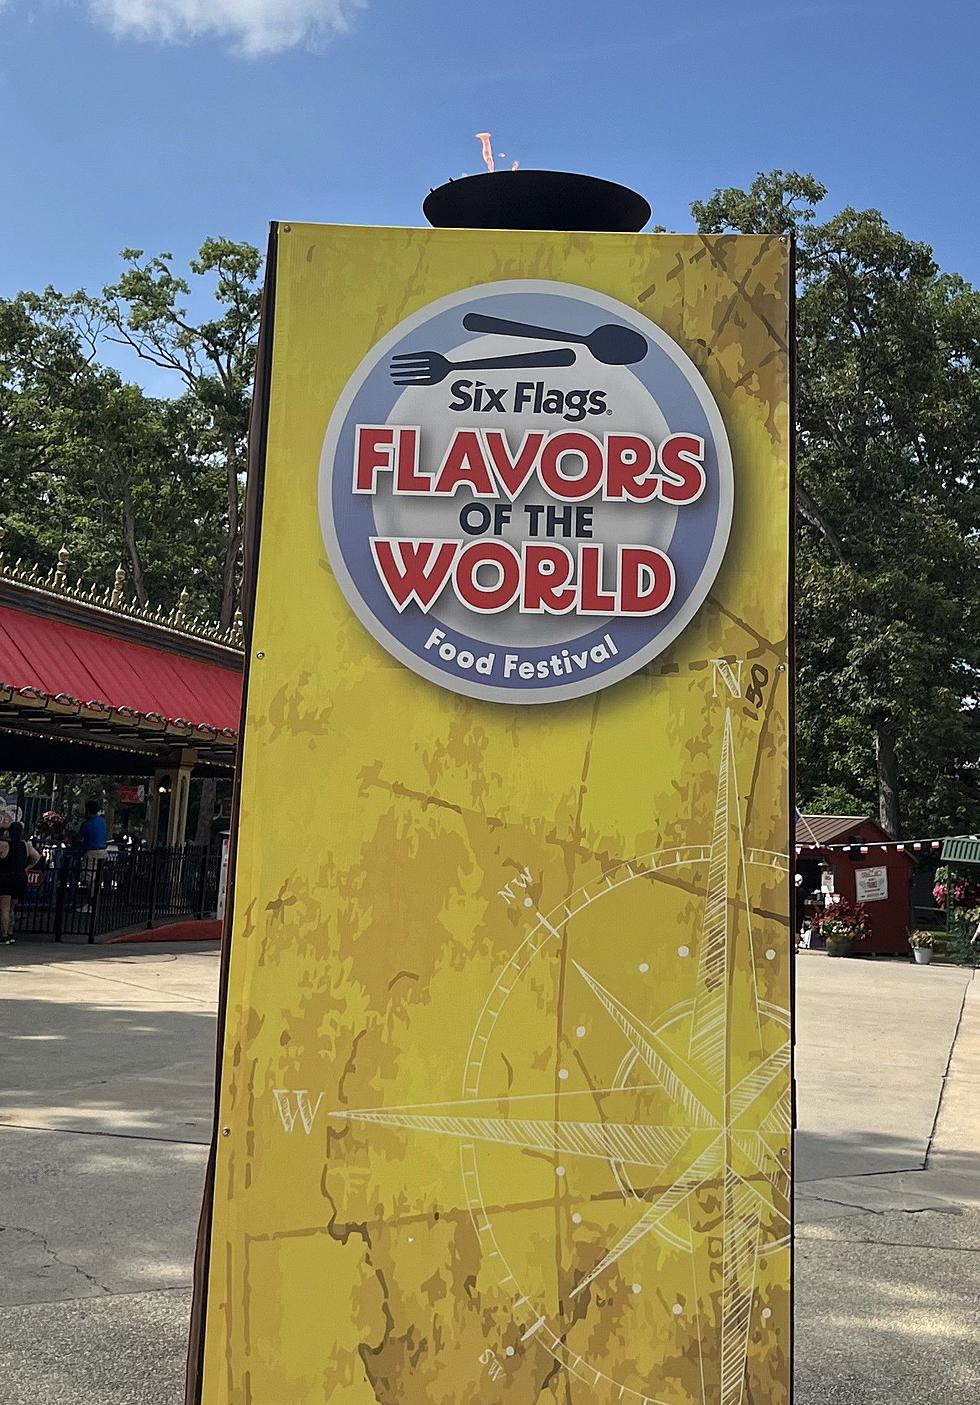 14 Pictures of the Fabulous “Flavors of the World” at Six Flags